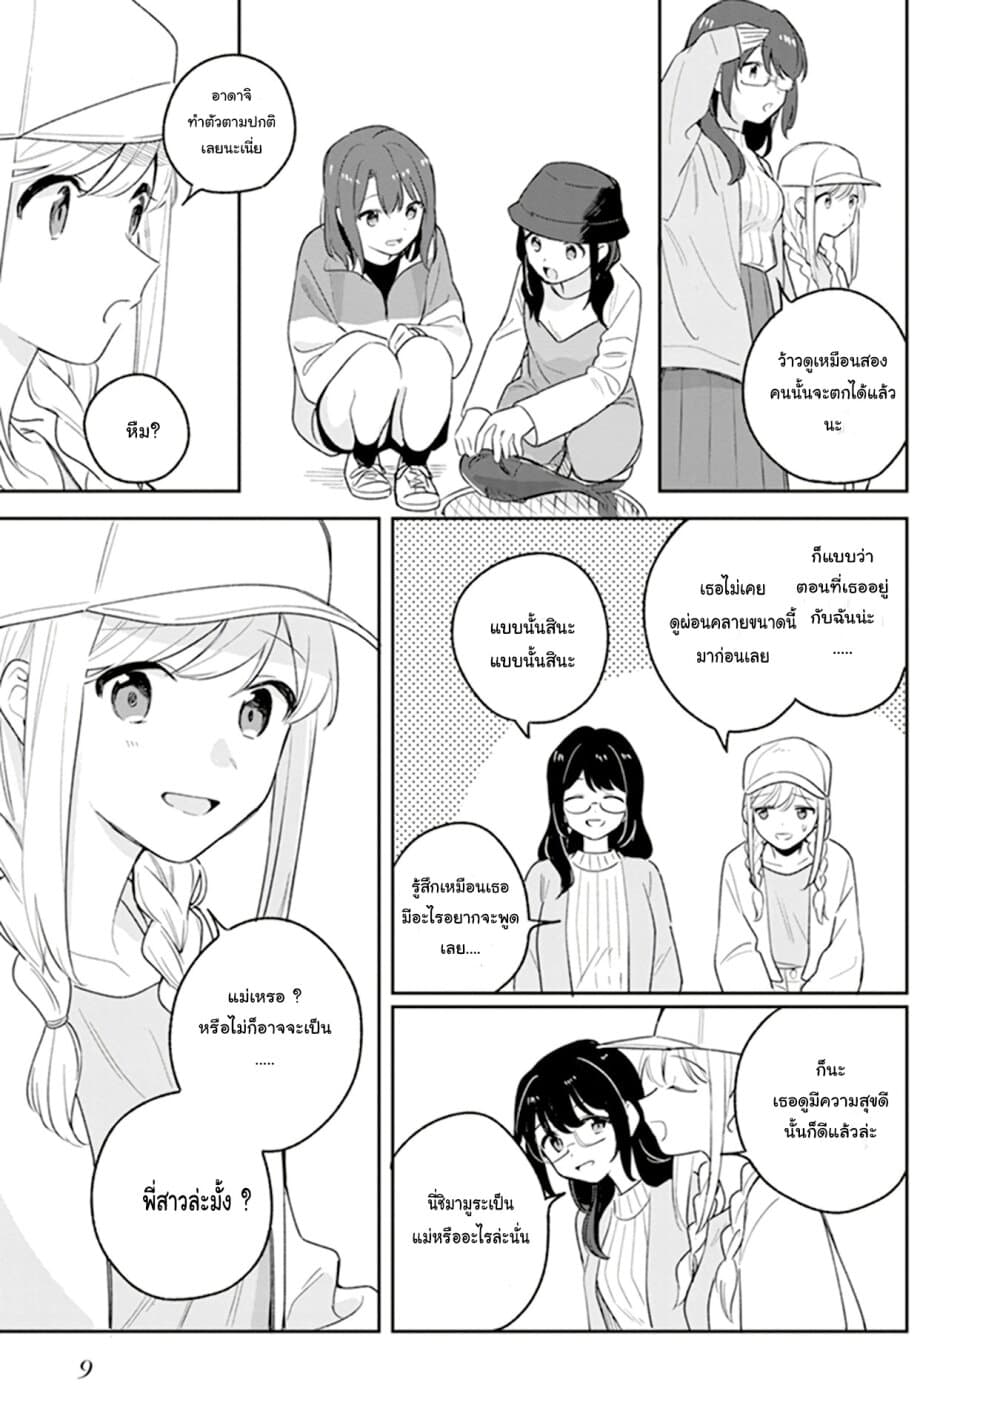 Adachi-to-Shimamura-Official-Comic-Anthology-Chapter1-11.jpg